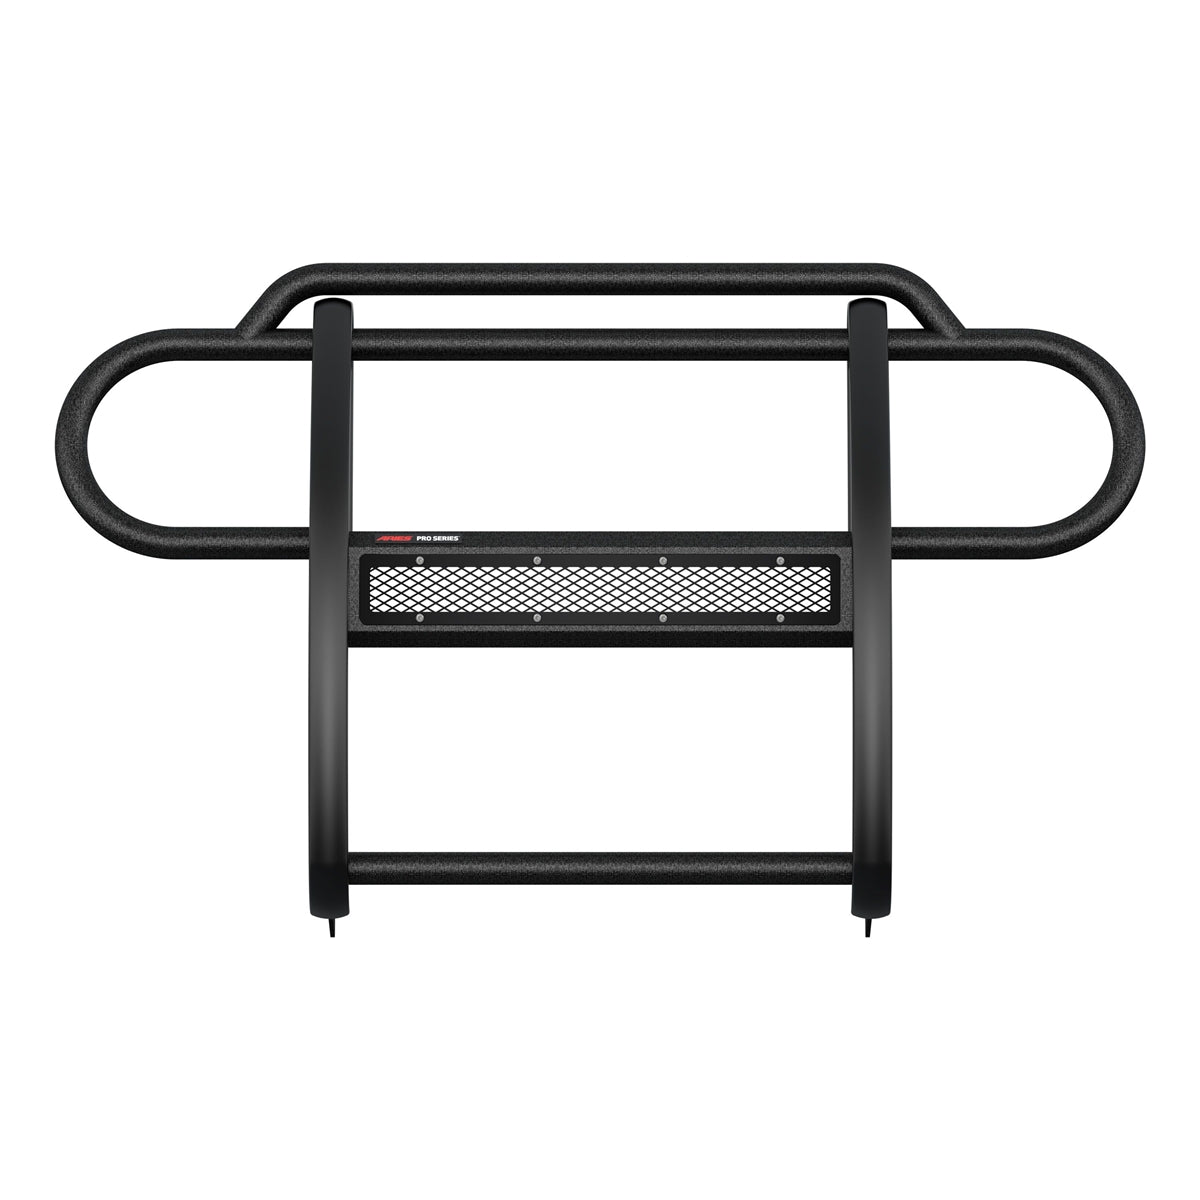 Aries Automotive Pro Series Grille Guard for 2018-C Jeep Wrangler 4 Door Unlimited Models